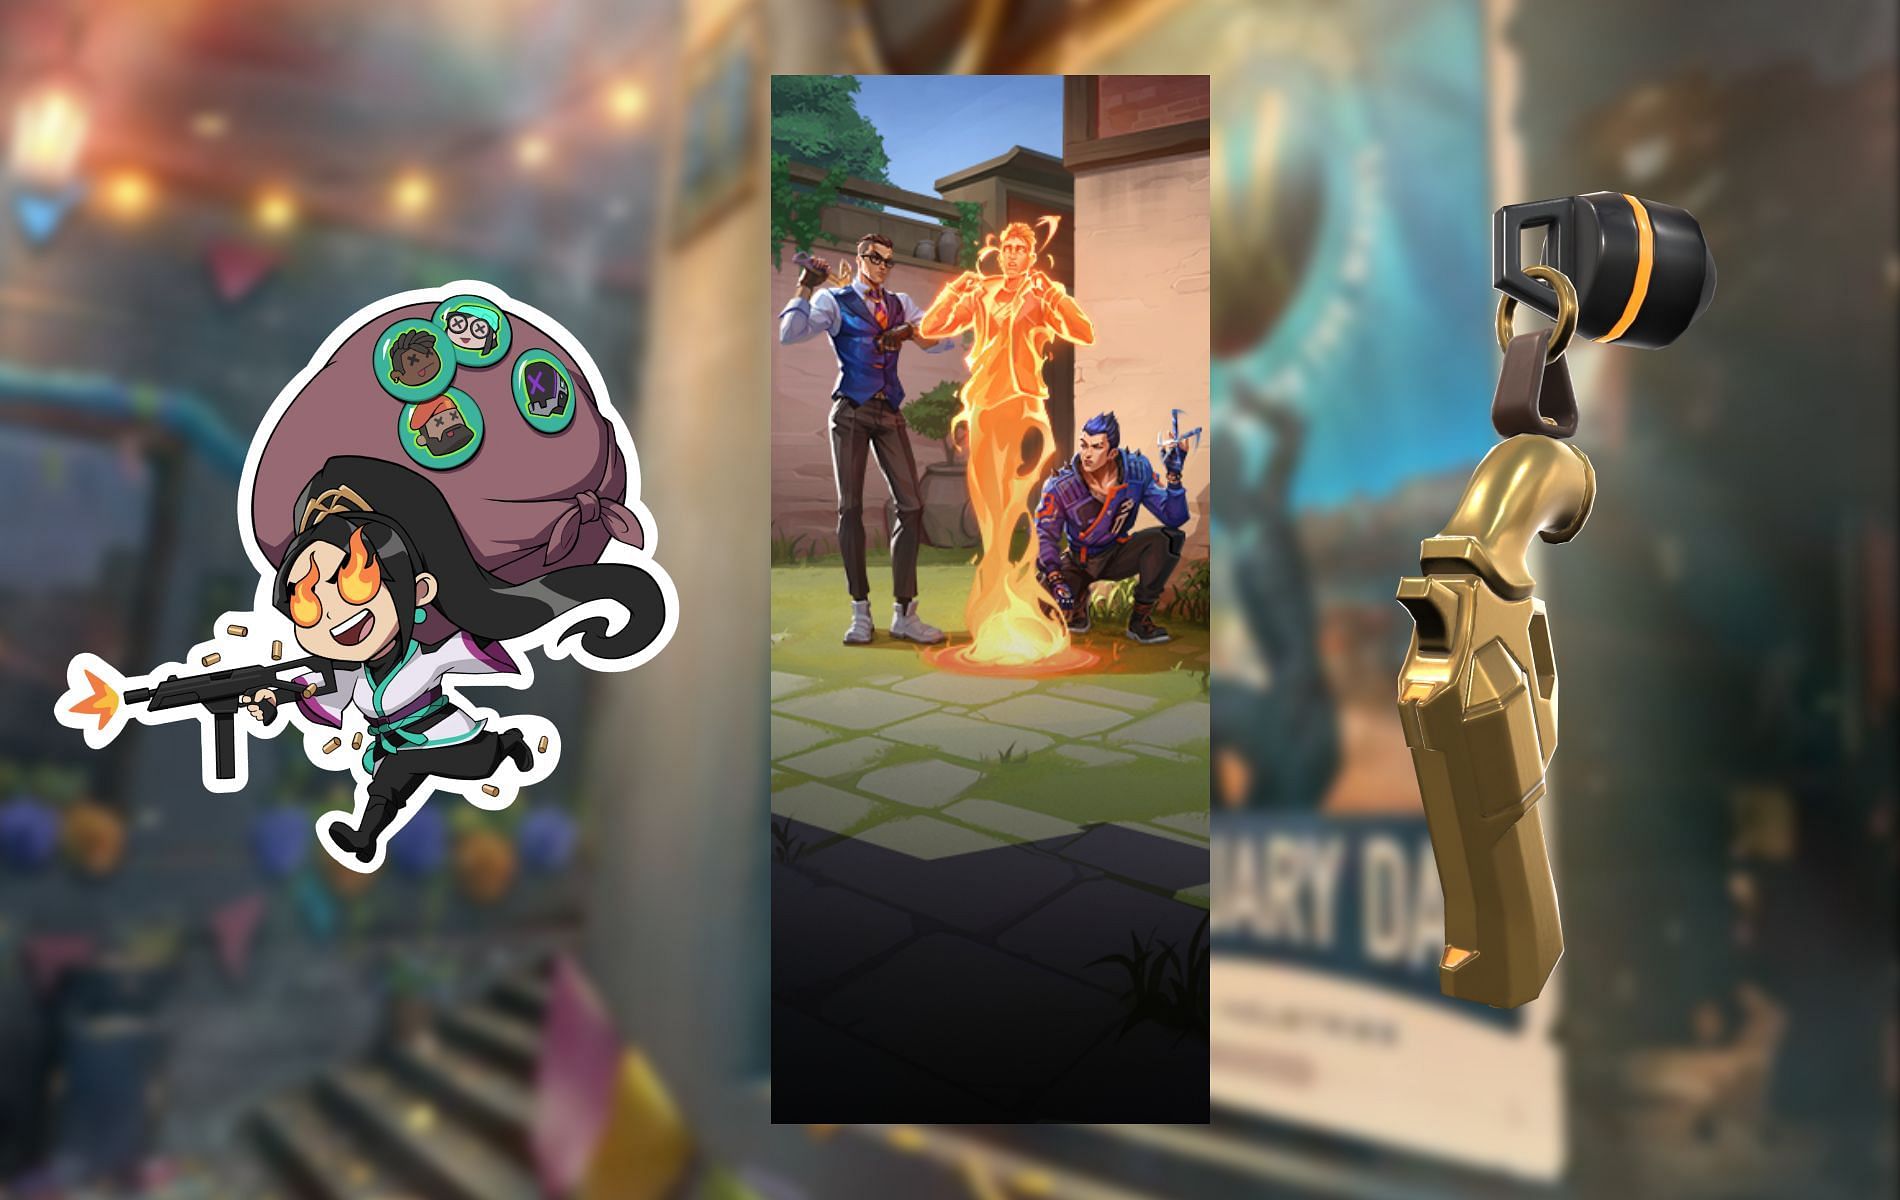 Every spray, card, and gun buddy listed that are coming with Valorant Episode 5 Act 1 BattlePass (Image by Sportskeeda)